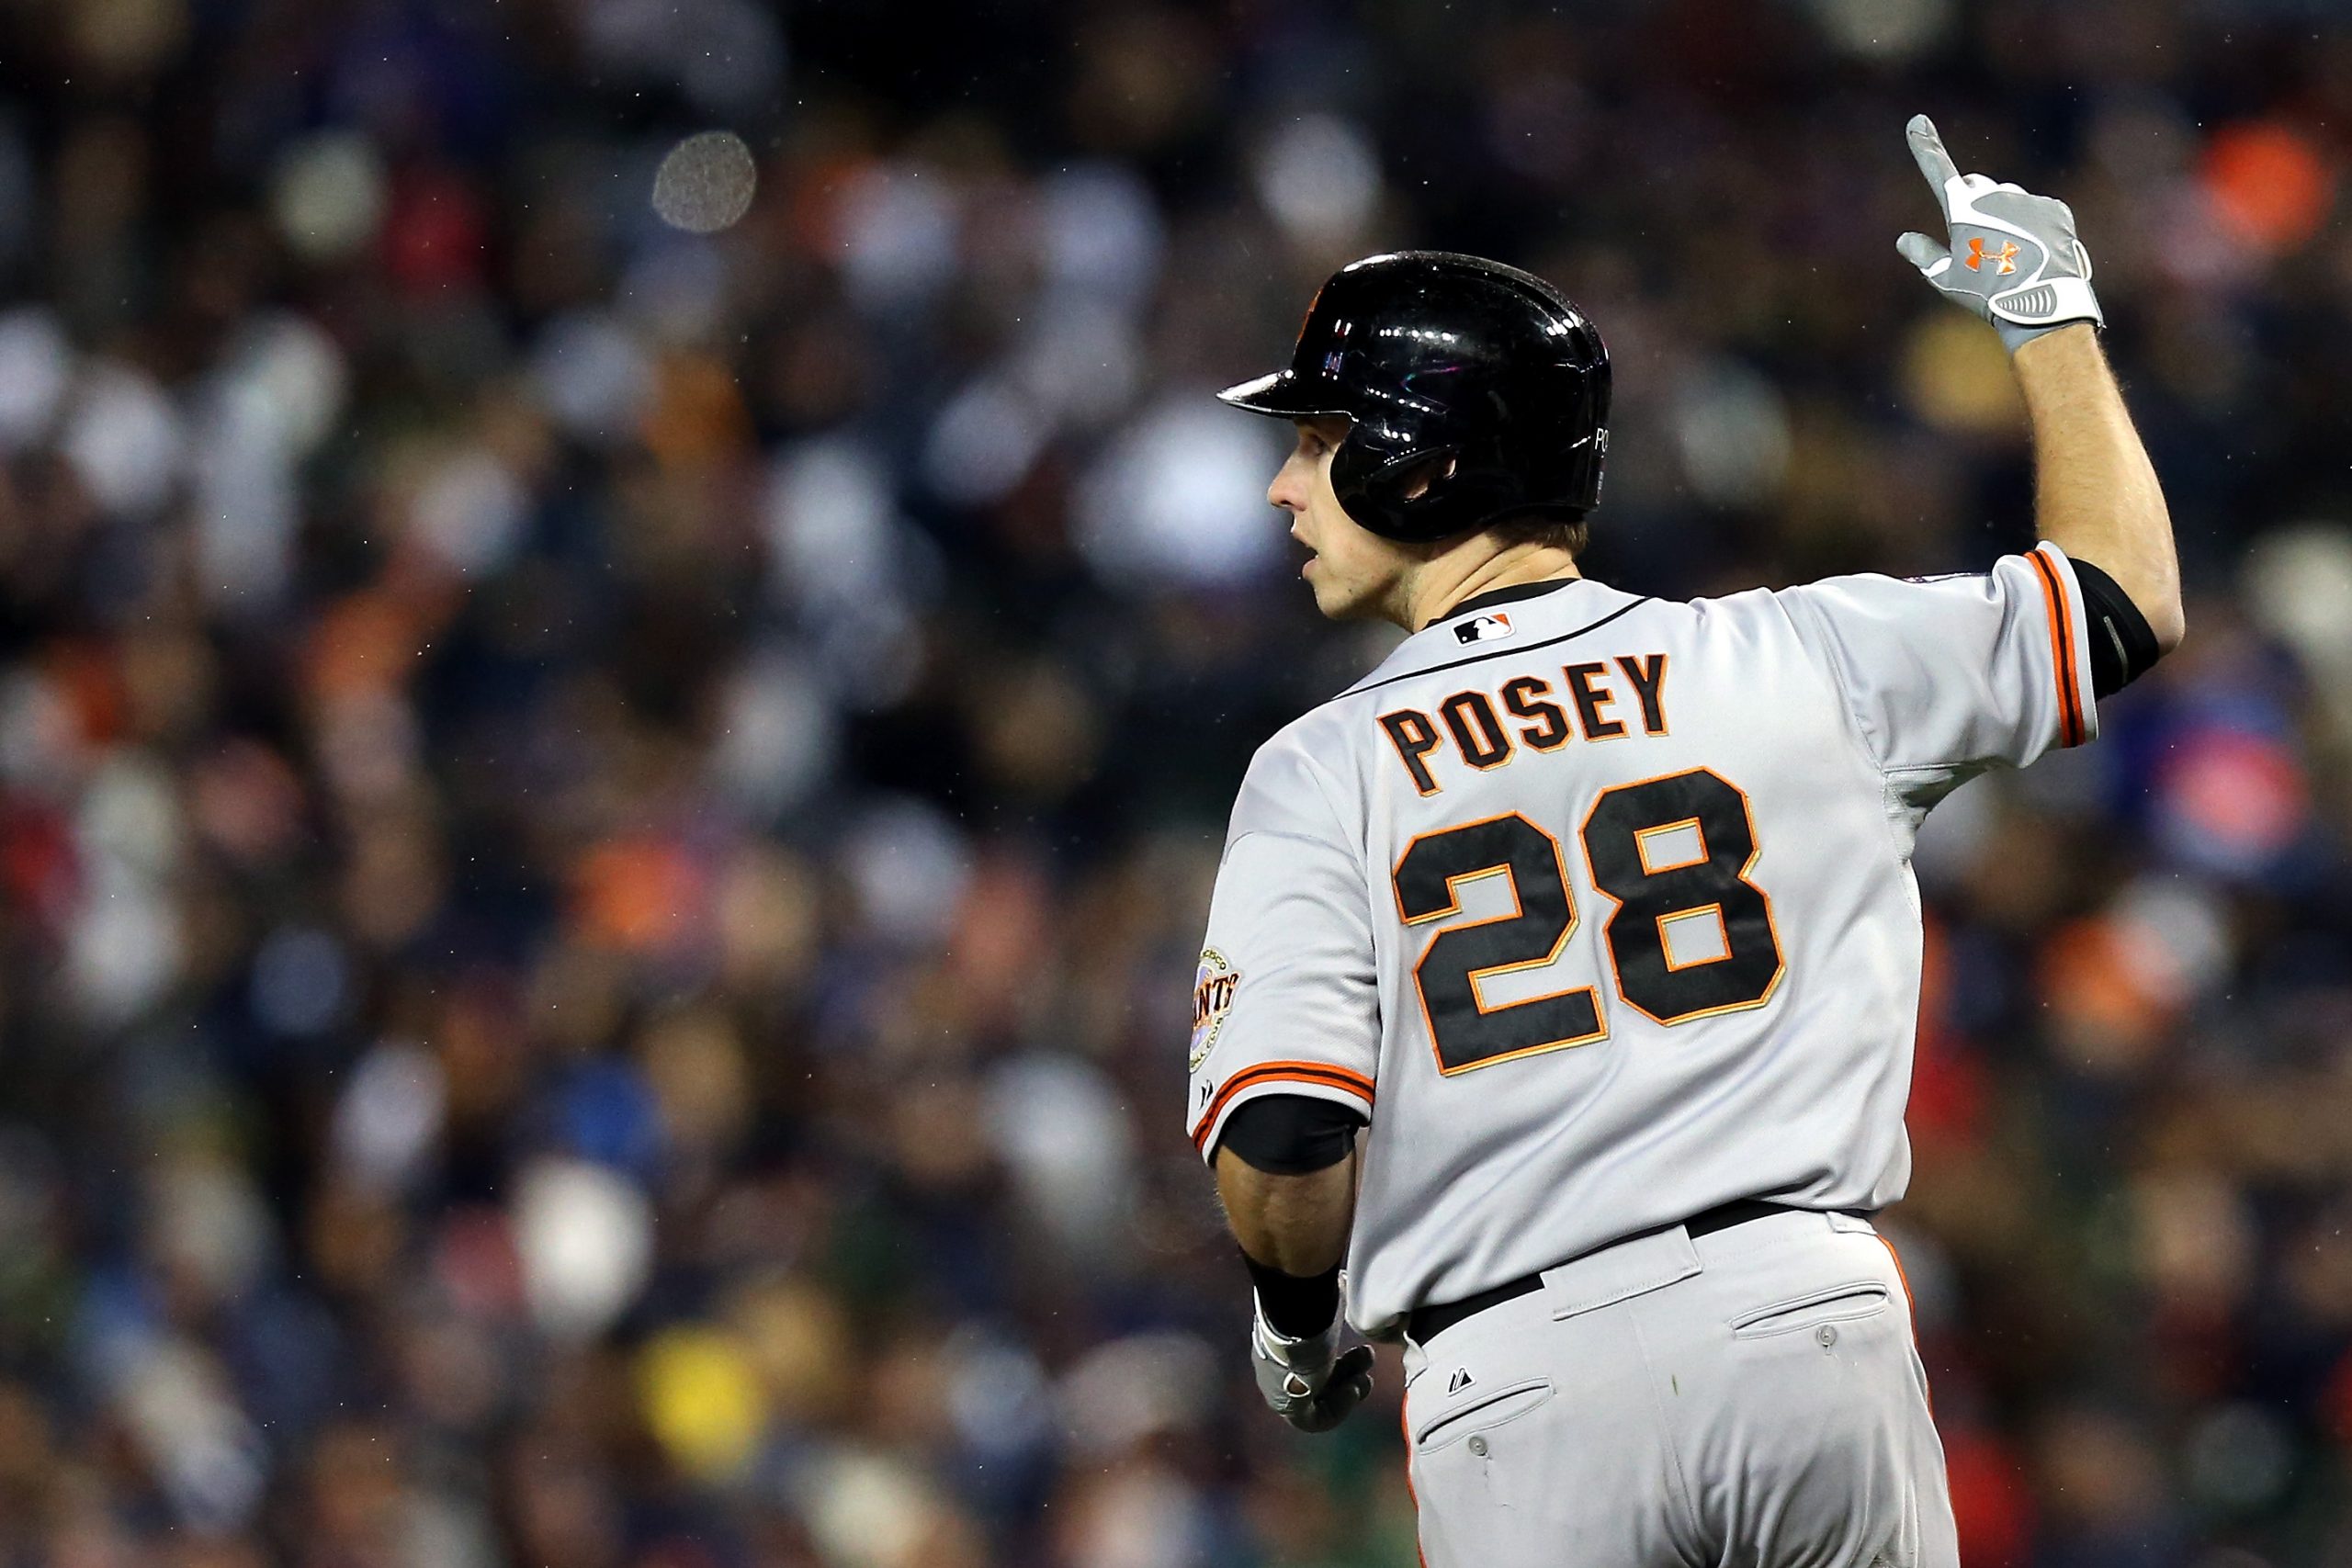 How Many Gold Gloves Does Buster Posey Have?